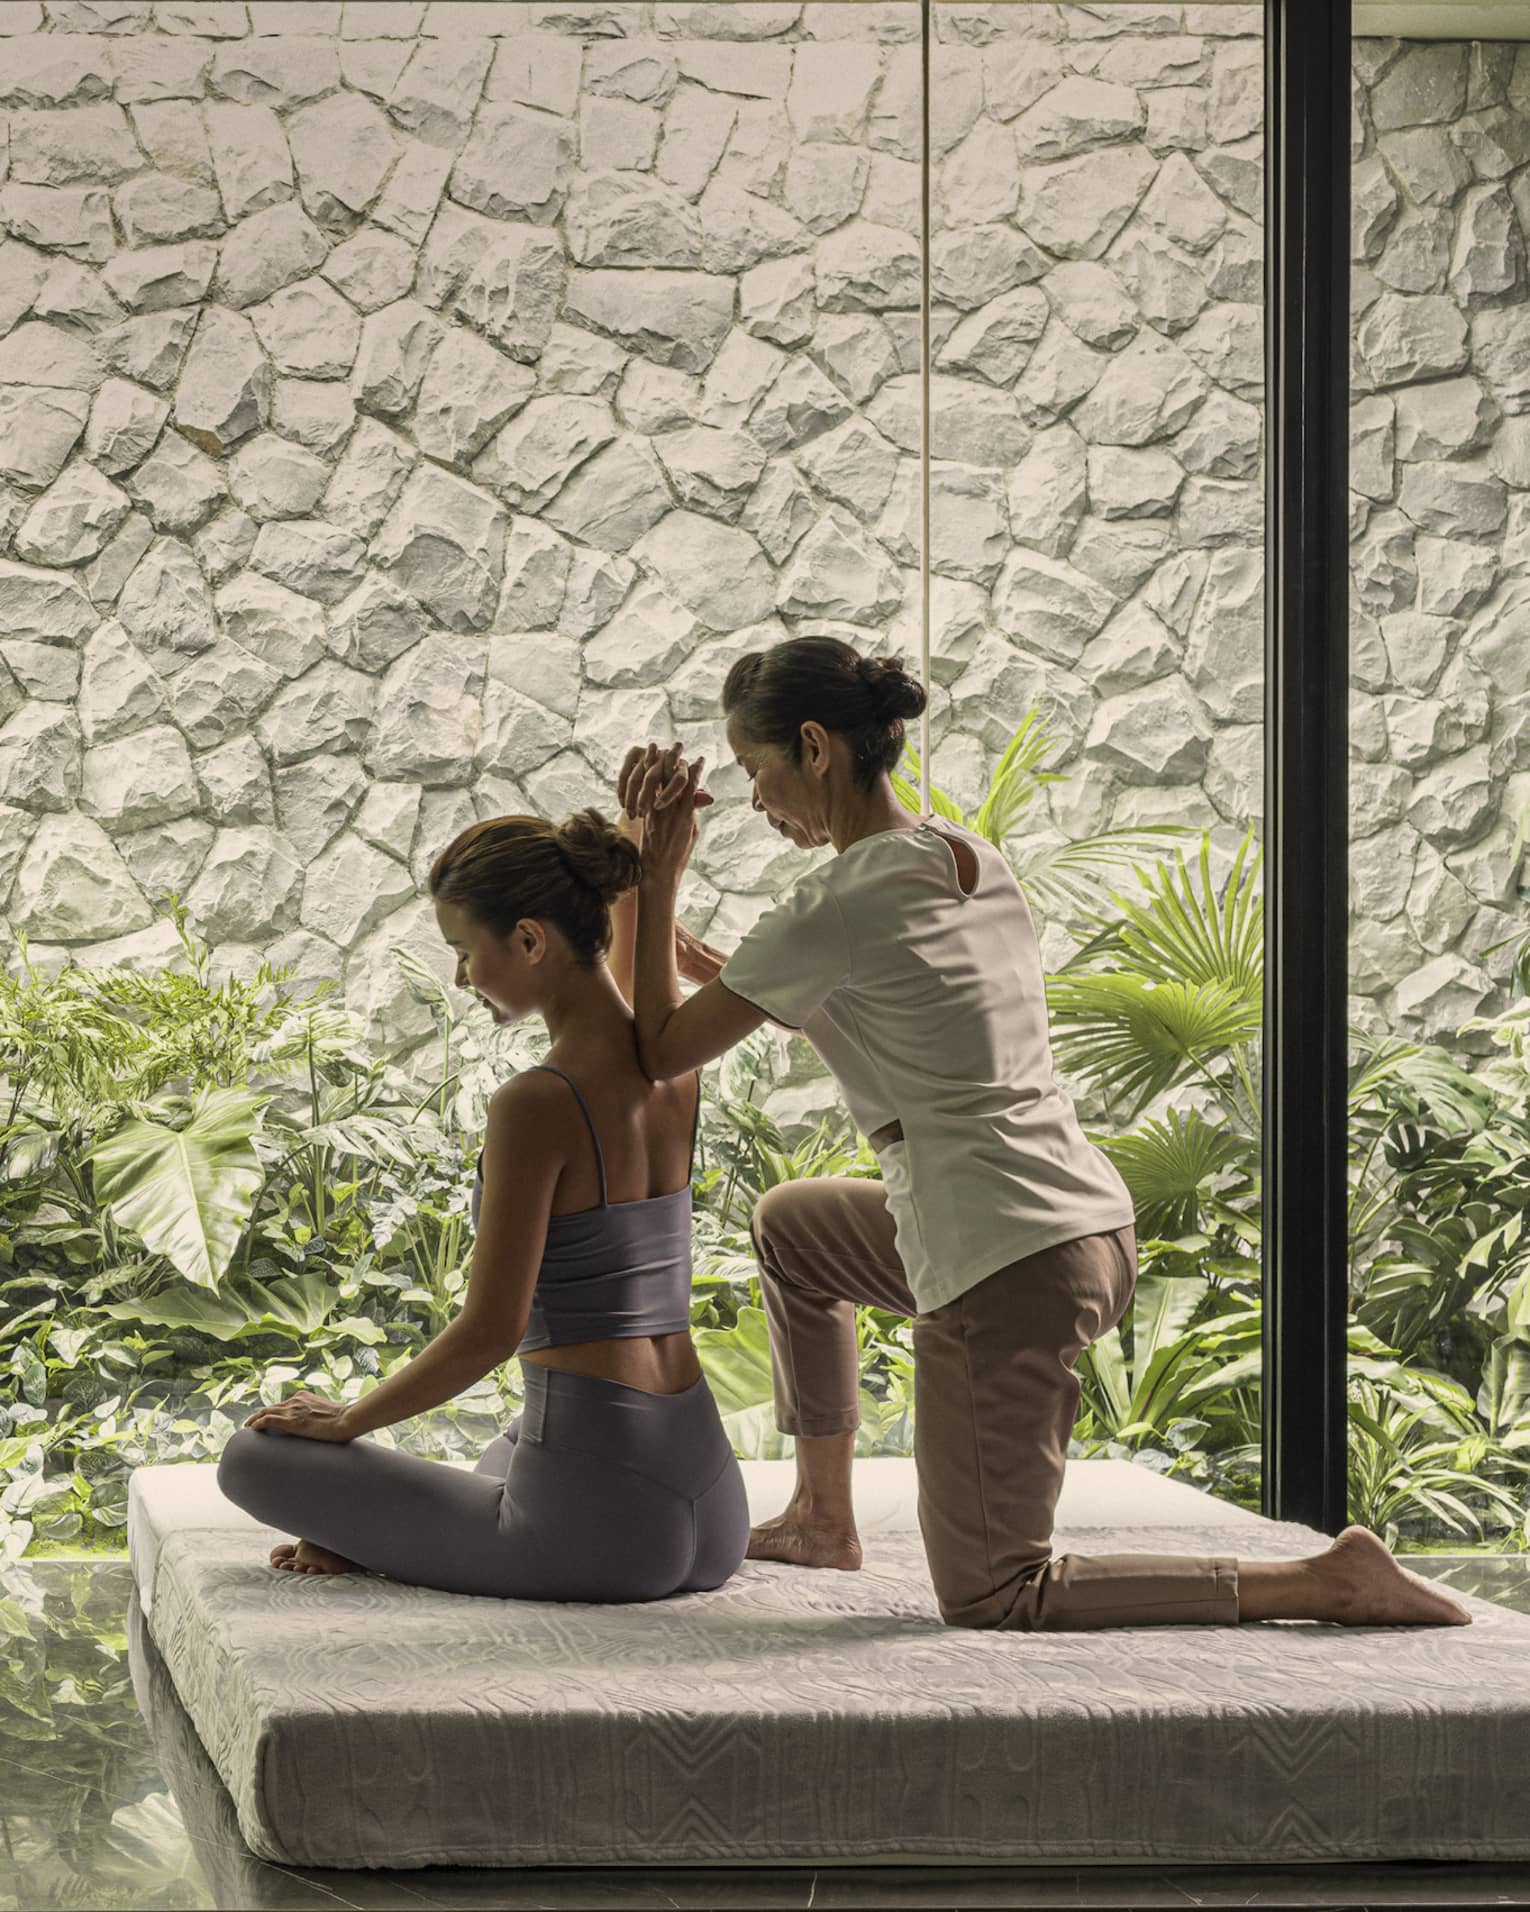 Massage therapist performs a traditional Thai massage on female guest